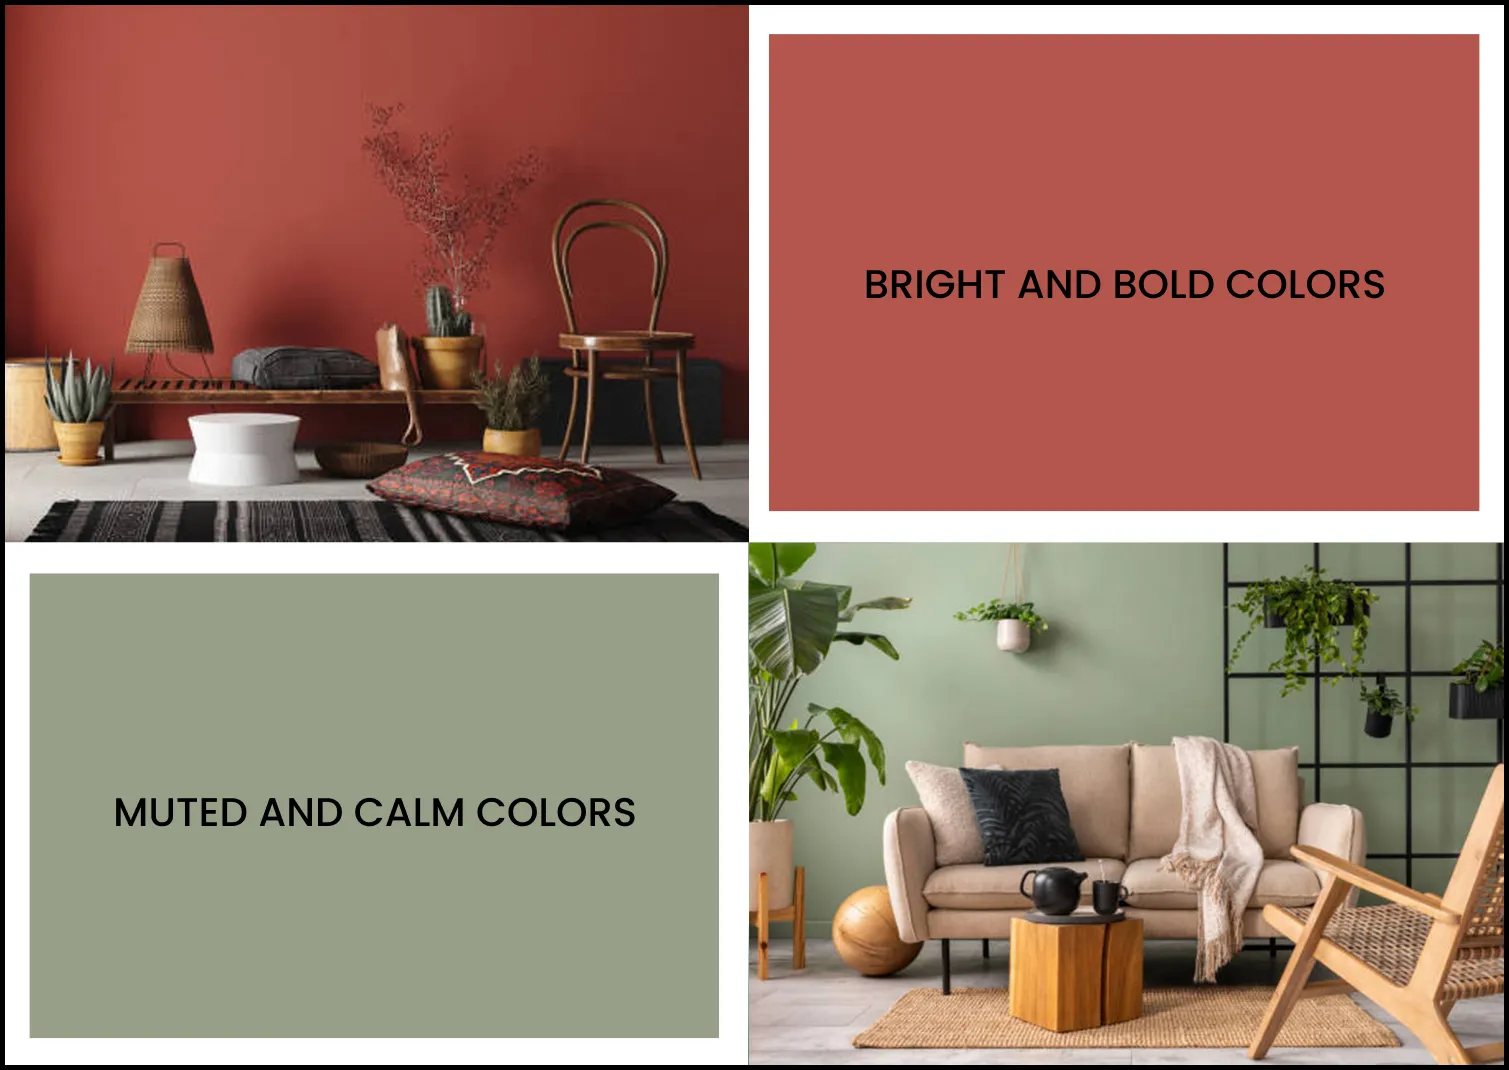 Two designs demonstrating the emotional impact of varying color palettes in home décor.